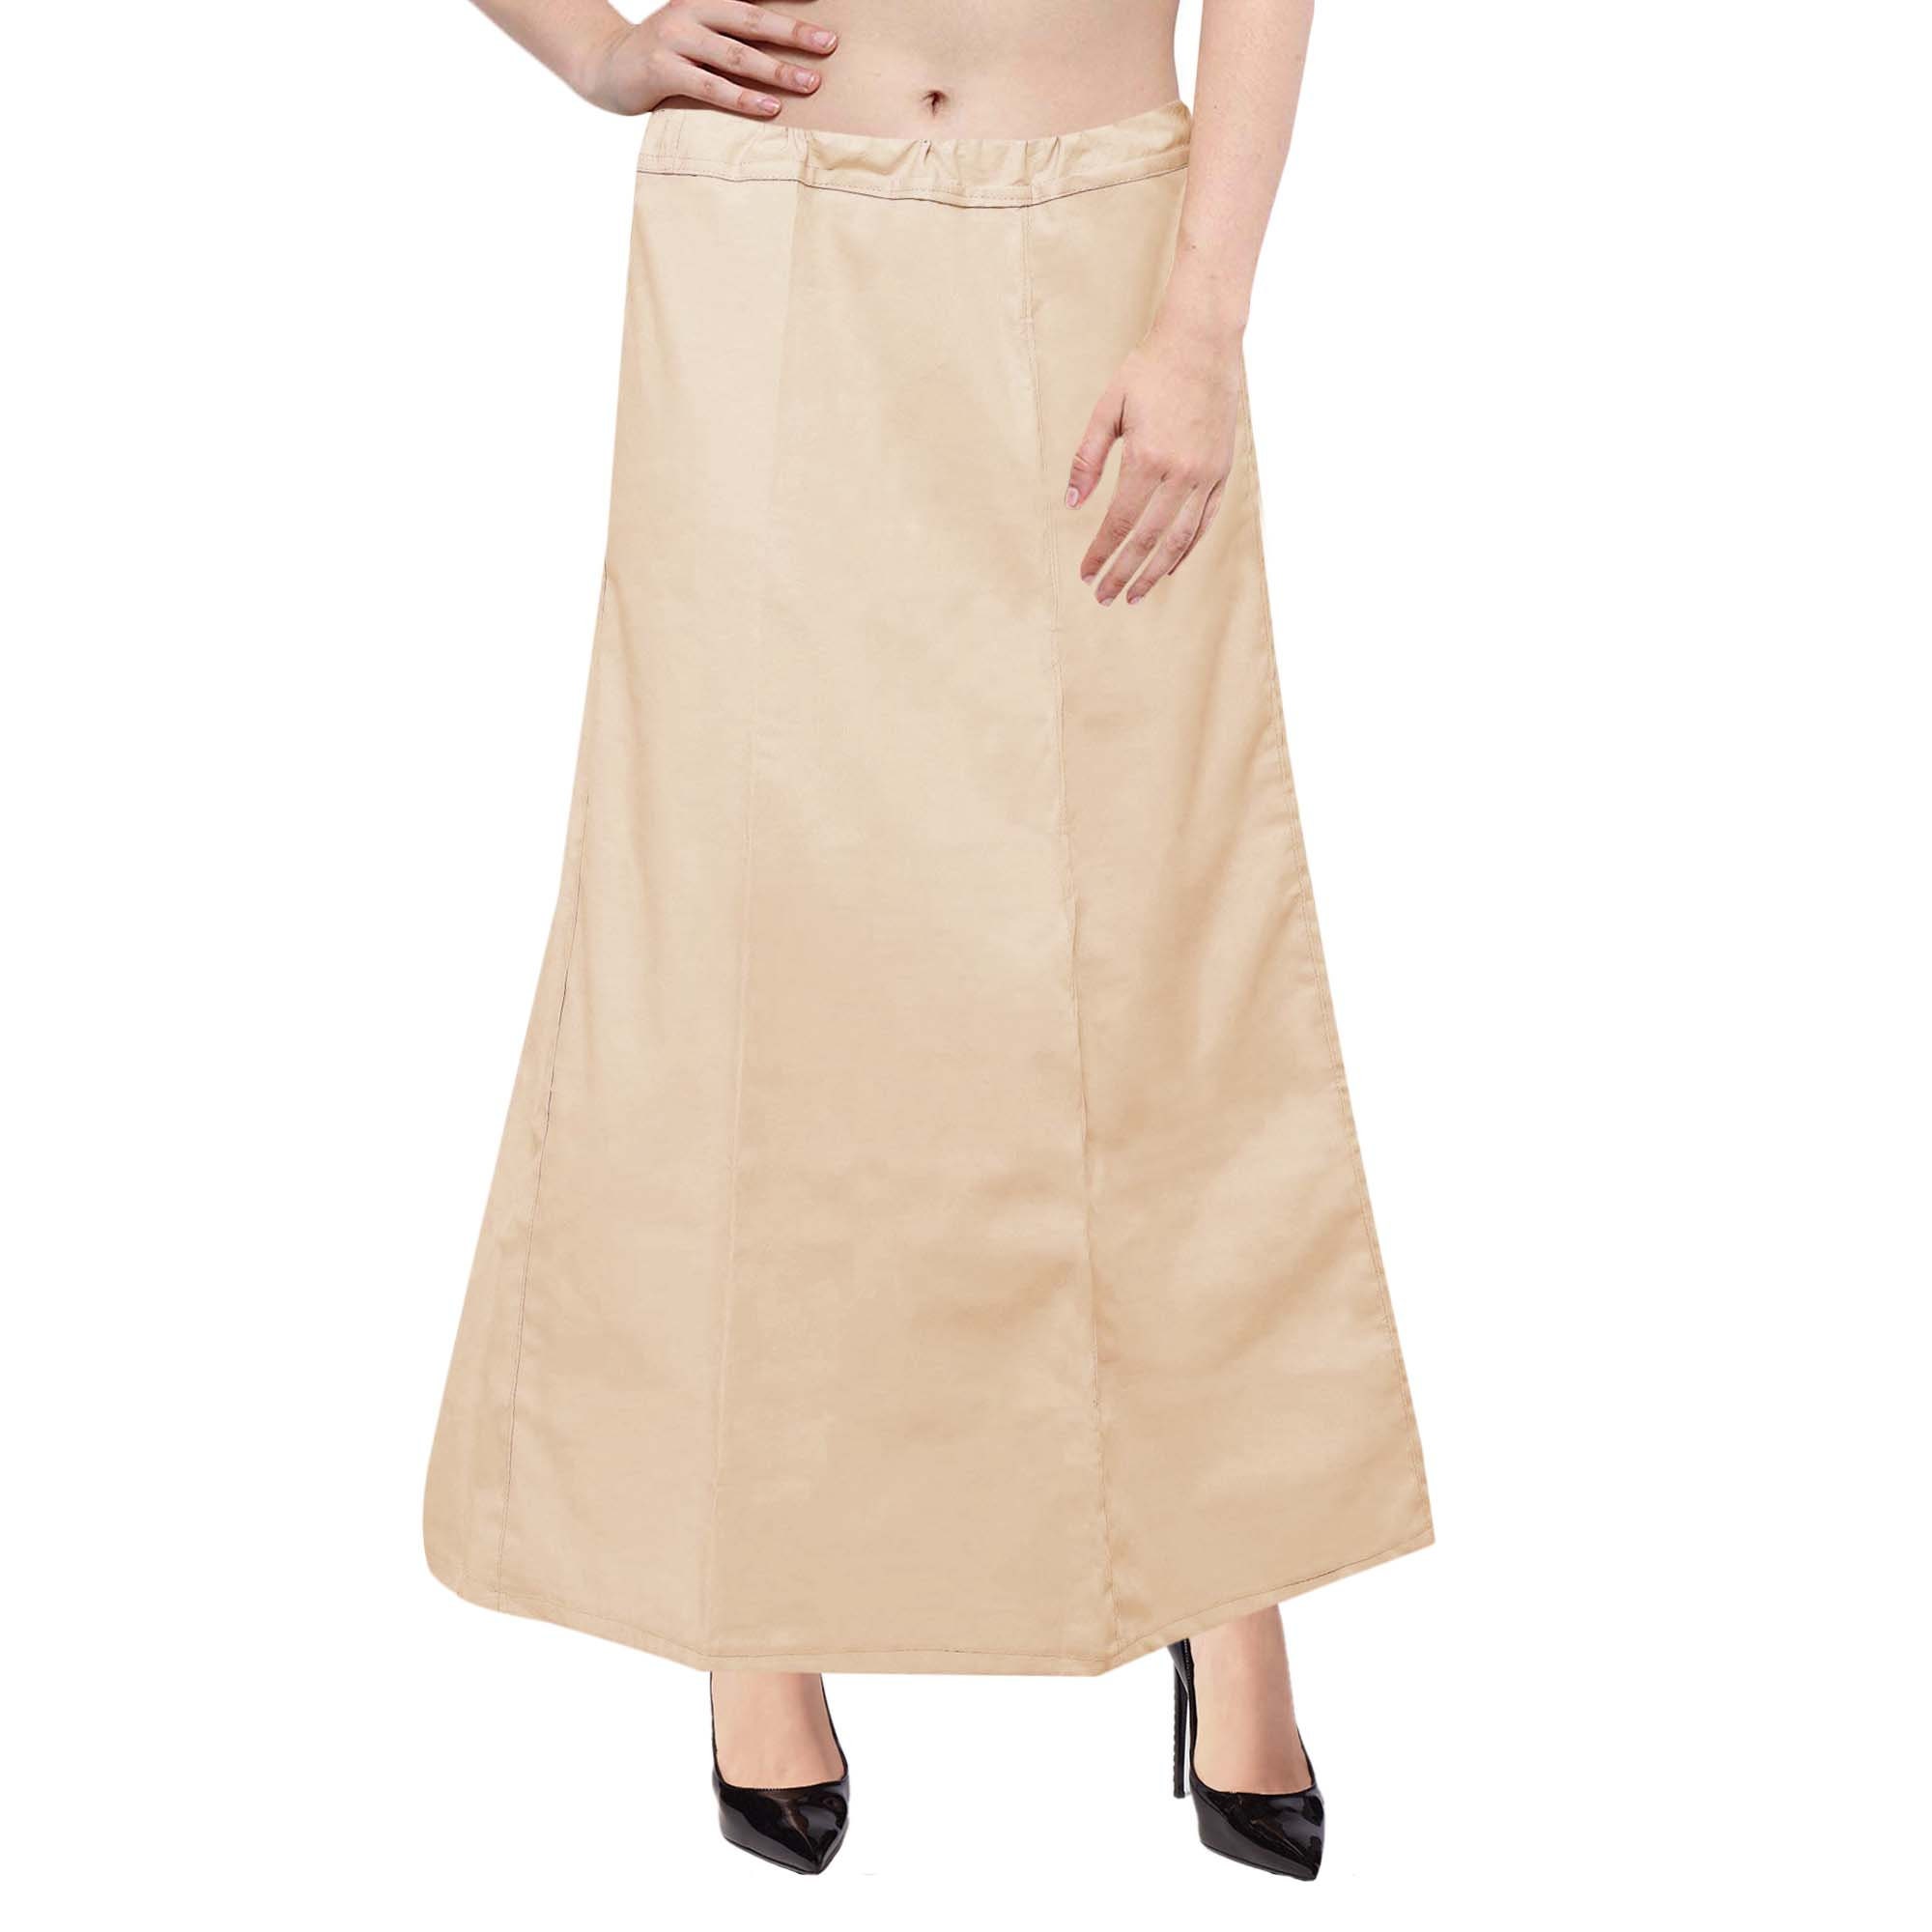  ibaexports Solid Petticoat Underskirt Bollywood Indian Women  Wear Cotton Lining For Sari Beige : Clothing, Shoes & Jewelry